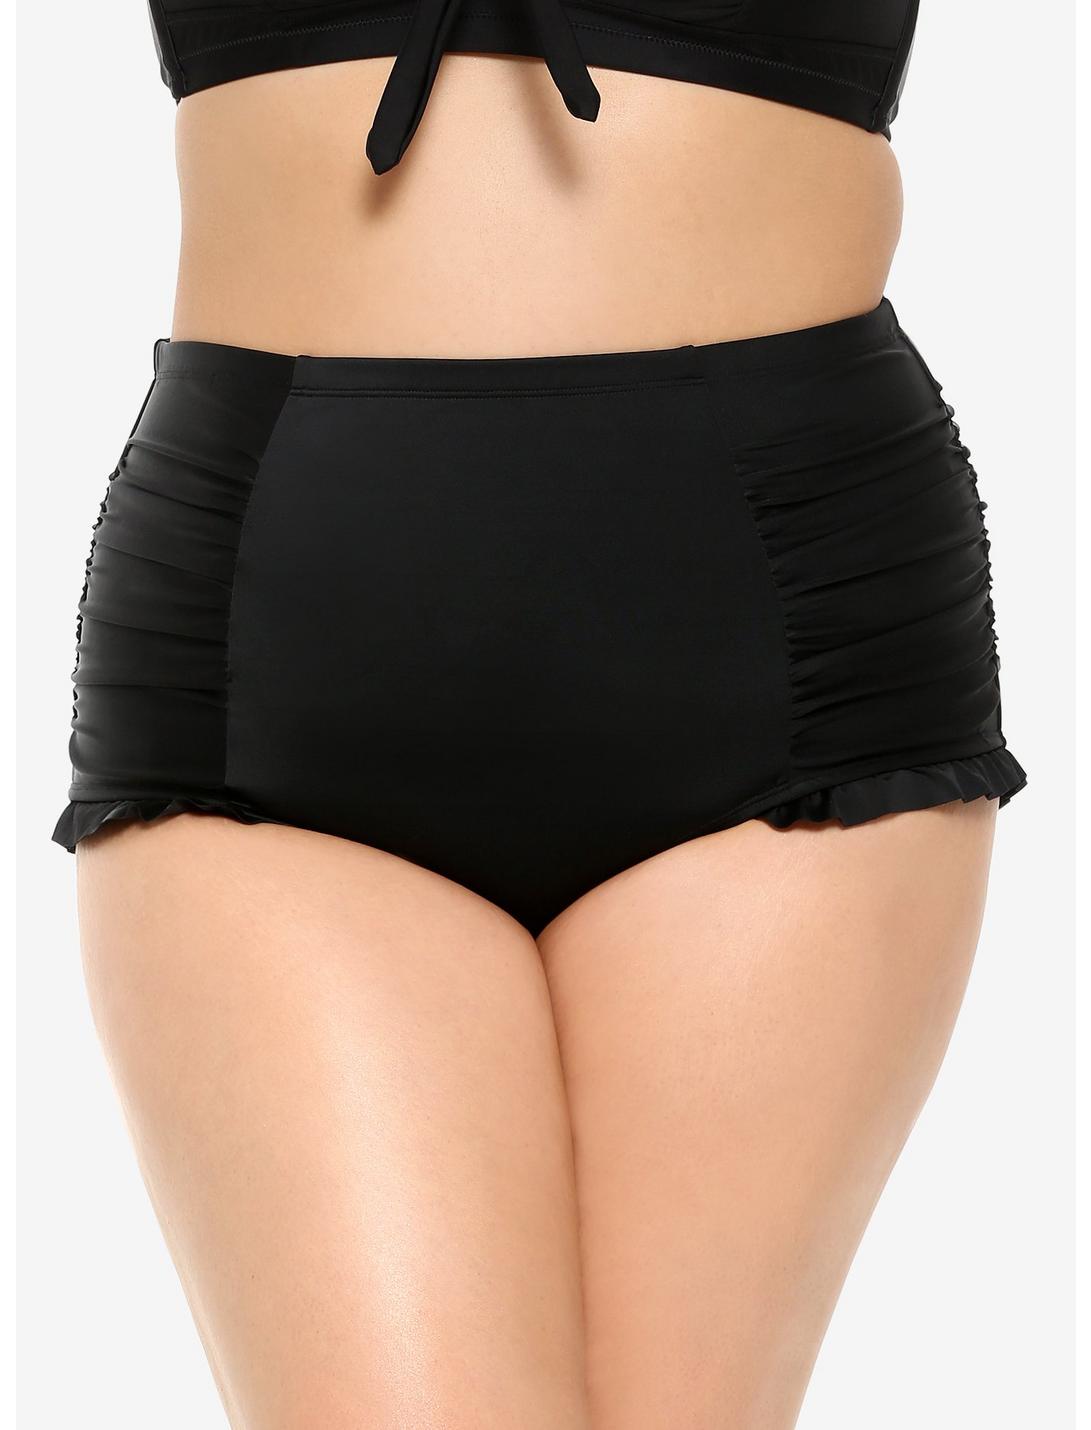 Black Ruched High-Wasited Swim Bottoms Plus Size, MULTI, hi-res